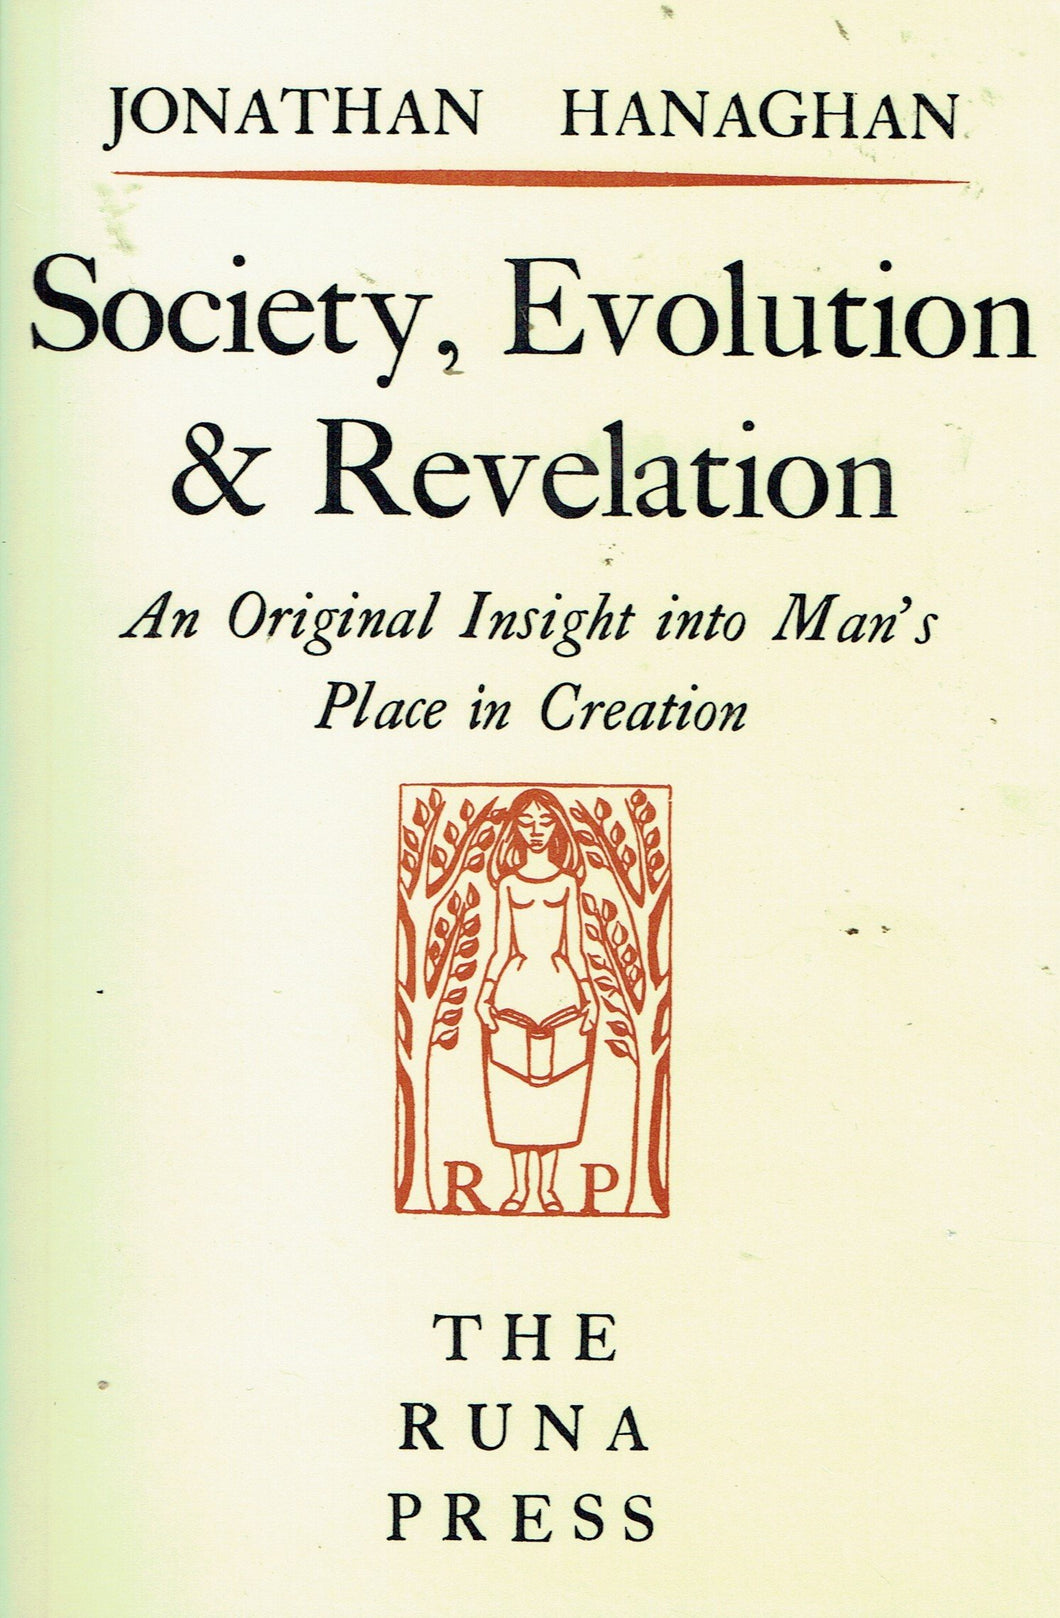 Society, Evolution and Revelation: An Original Insight into Man's Place in Creation